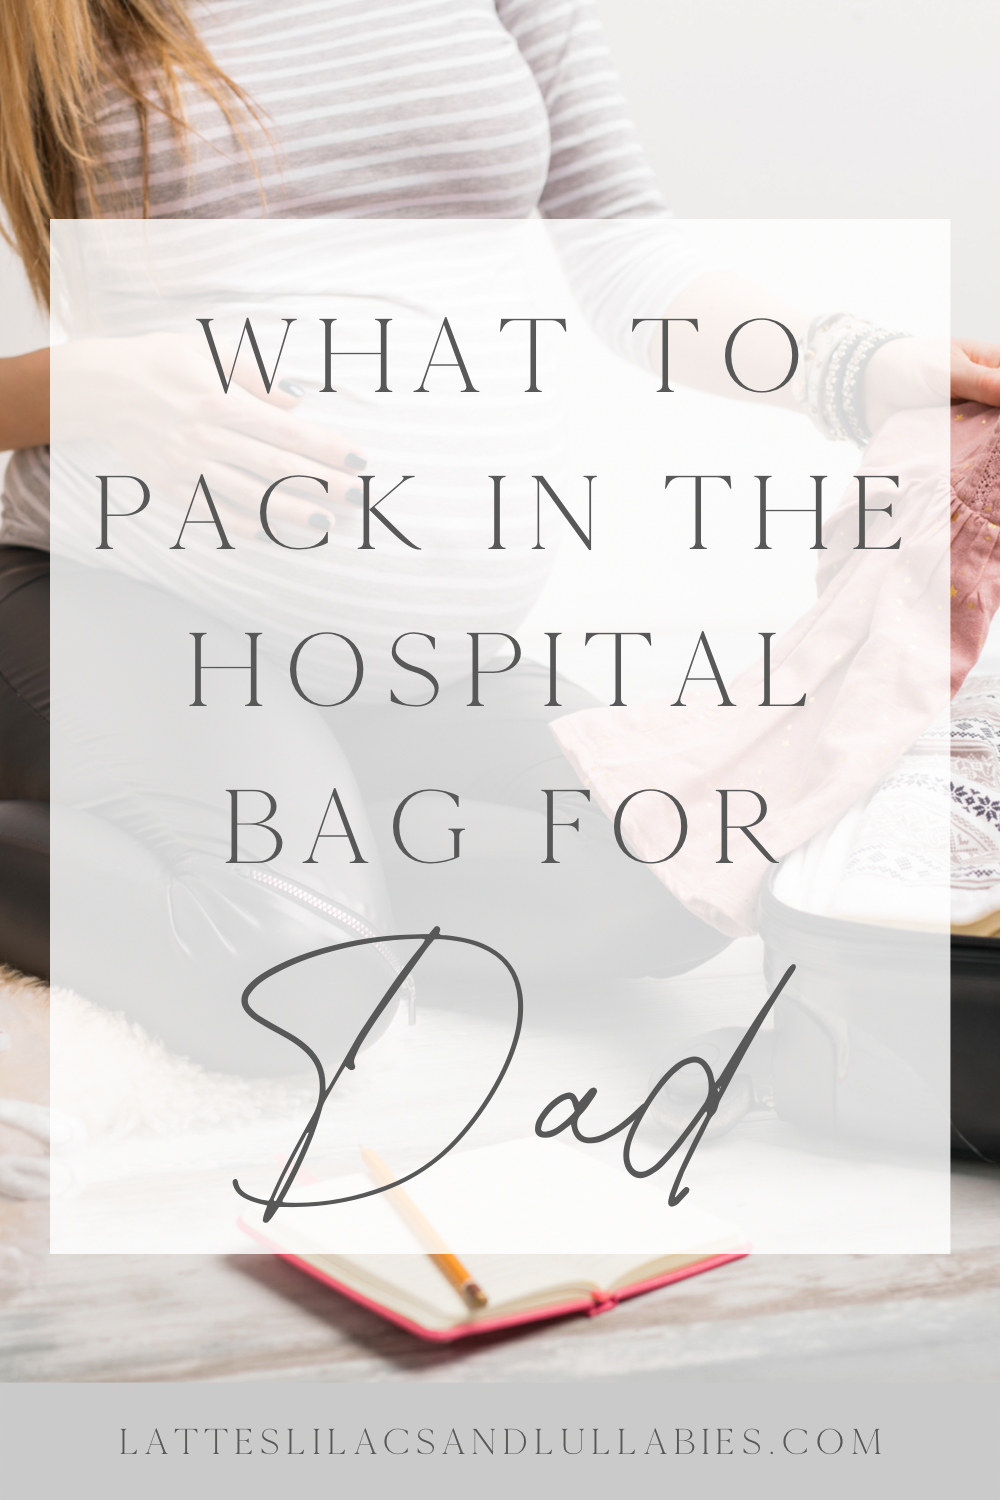 Hospital Bag for Dad: What to Pack for the Hospital After Baby is Born